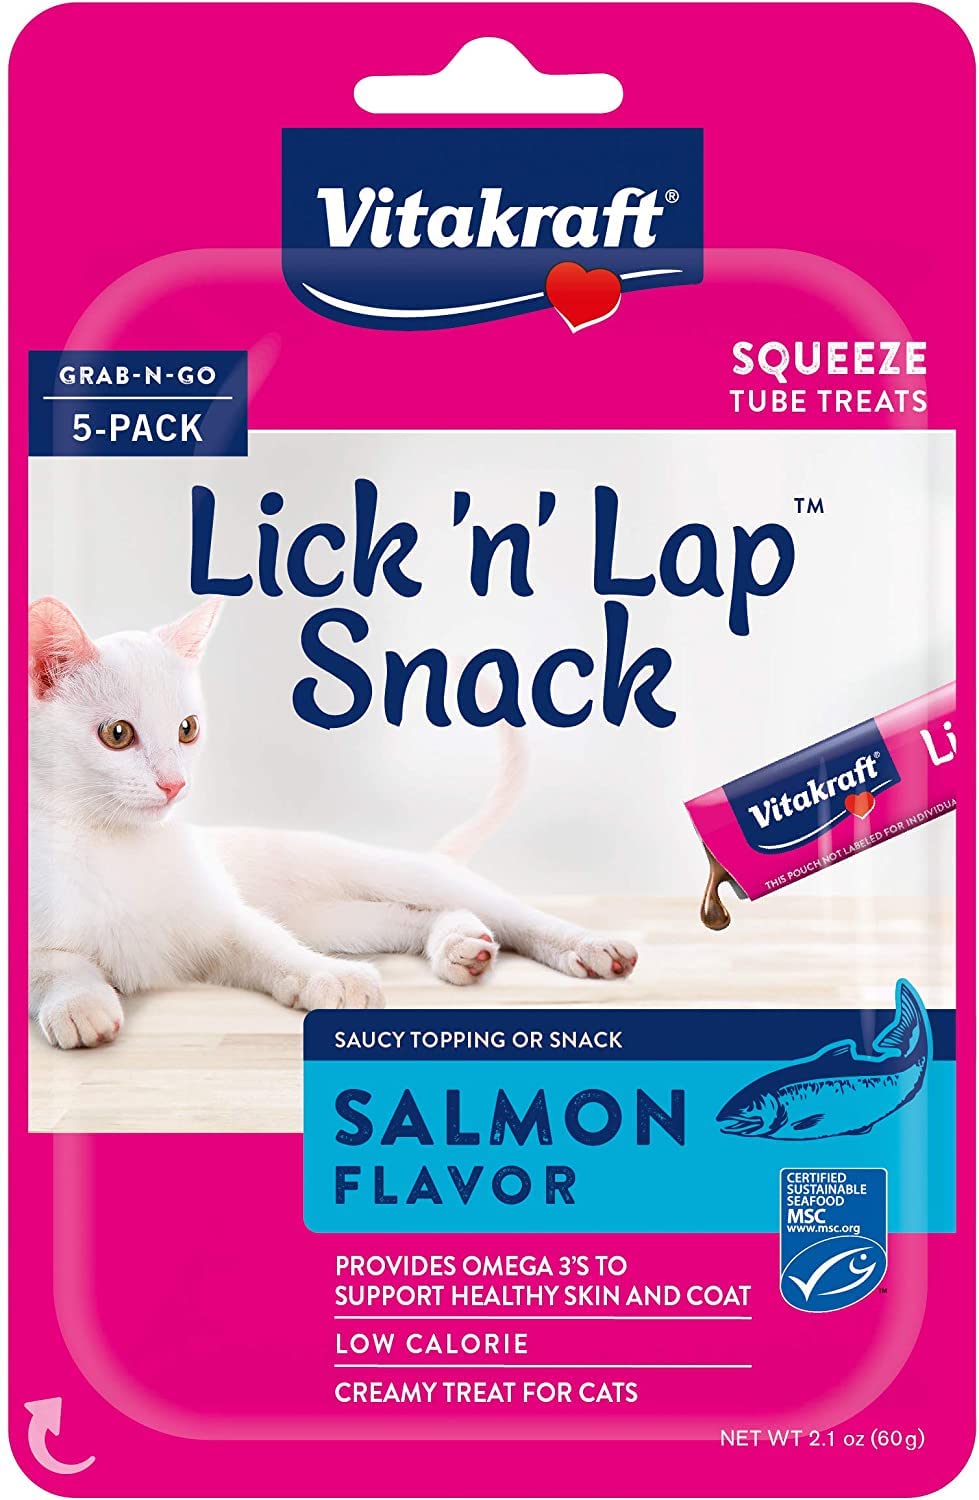 5-Pack 0.42-Oz Vitakraft Cat Lick 'n' Lap Grab-n-Go Squeeze Tube Treats (Salmon) $1.81 + Free Shipping w/ Prime or on $35+